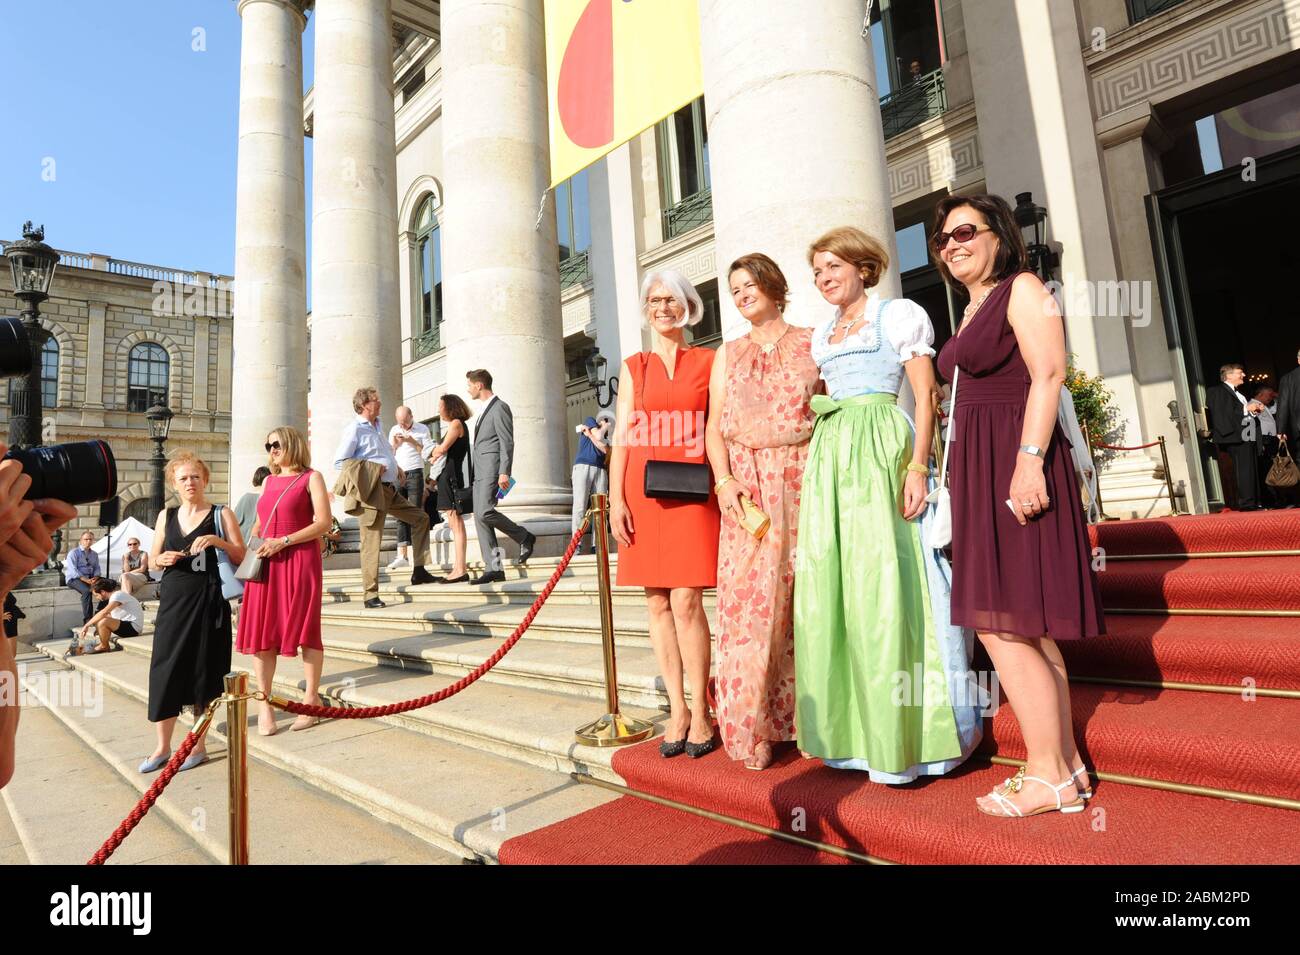 Premiere guests on their way to the premiere of Richard Strauss' opera 'Salome' at the Munich Opera Festival 2019. [automated translation] Stock Photo